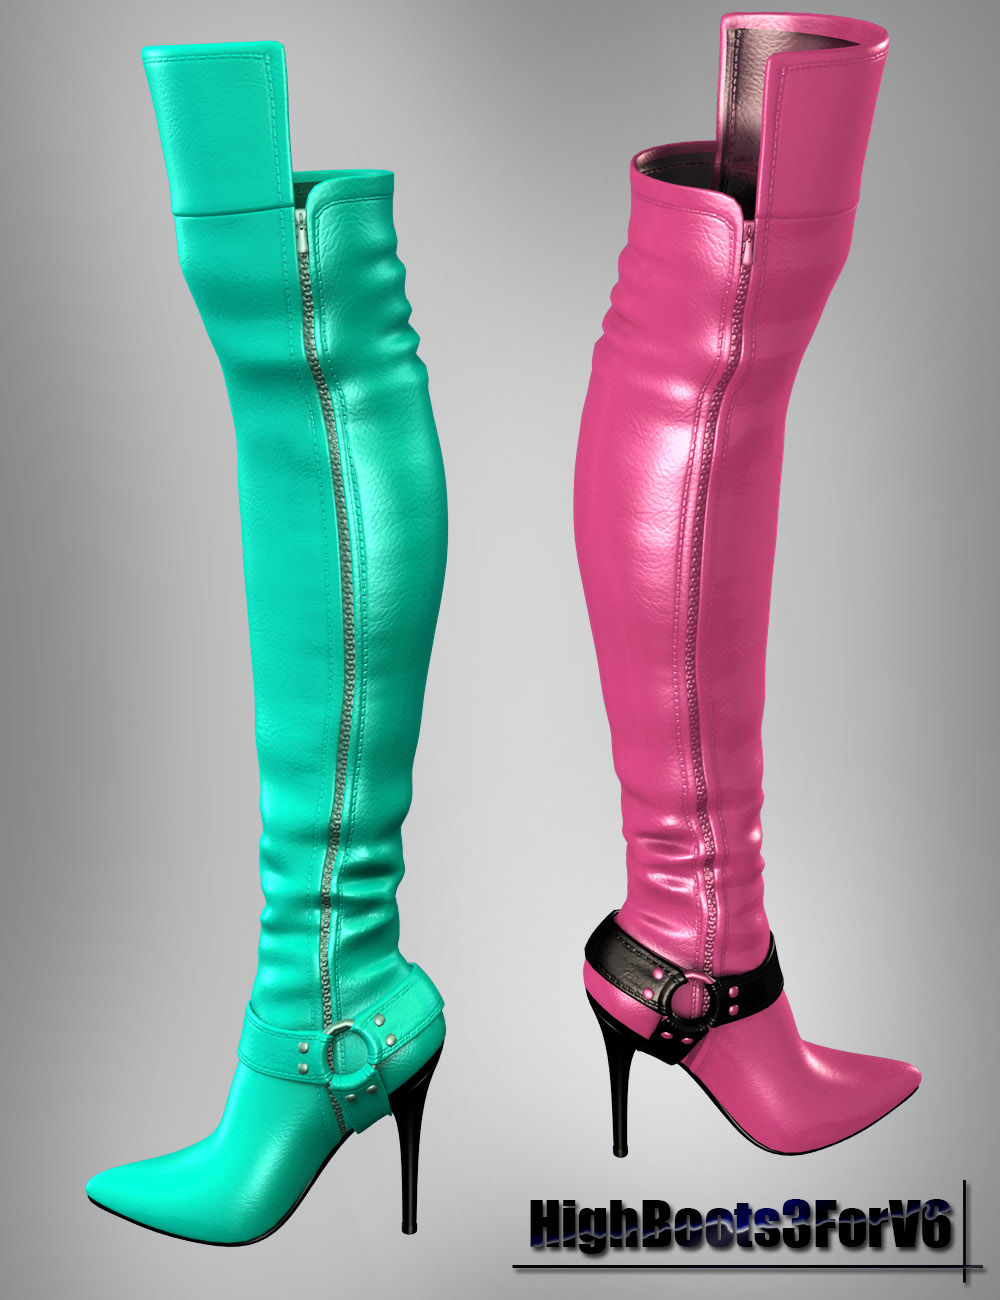 HighBoots3 For Victoria 6 by: dx30, 3D Models by Daz 3D